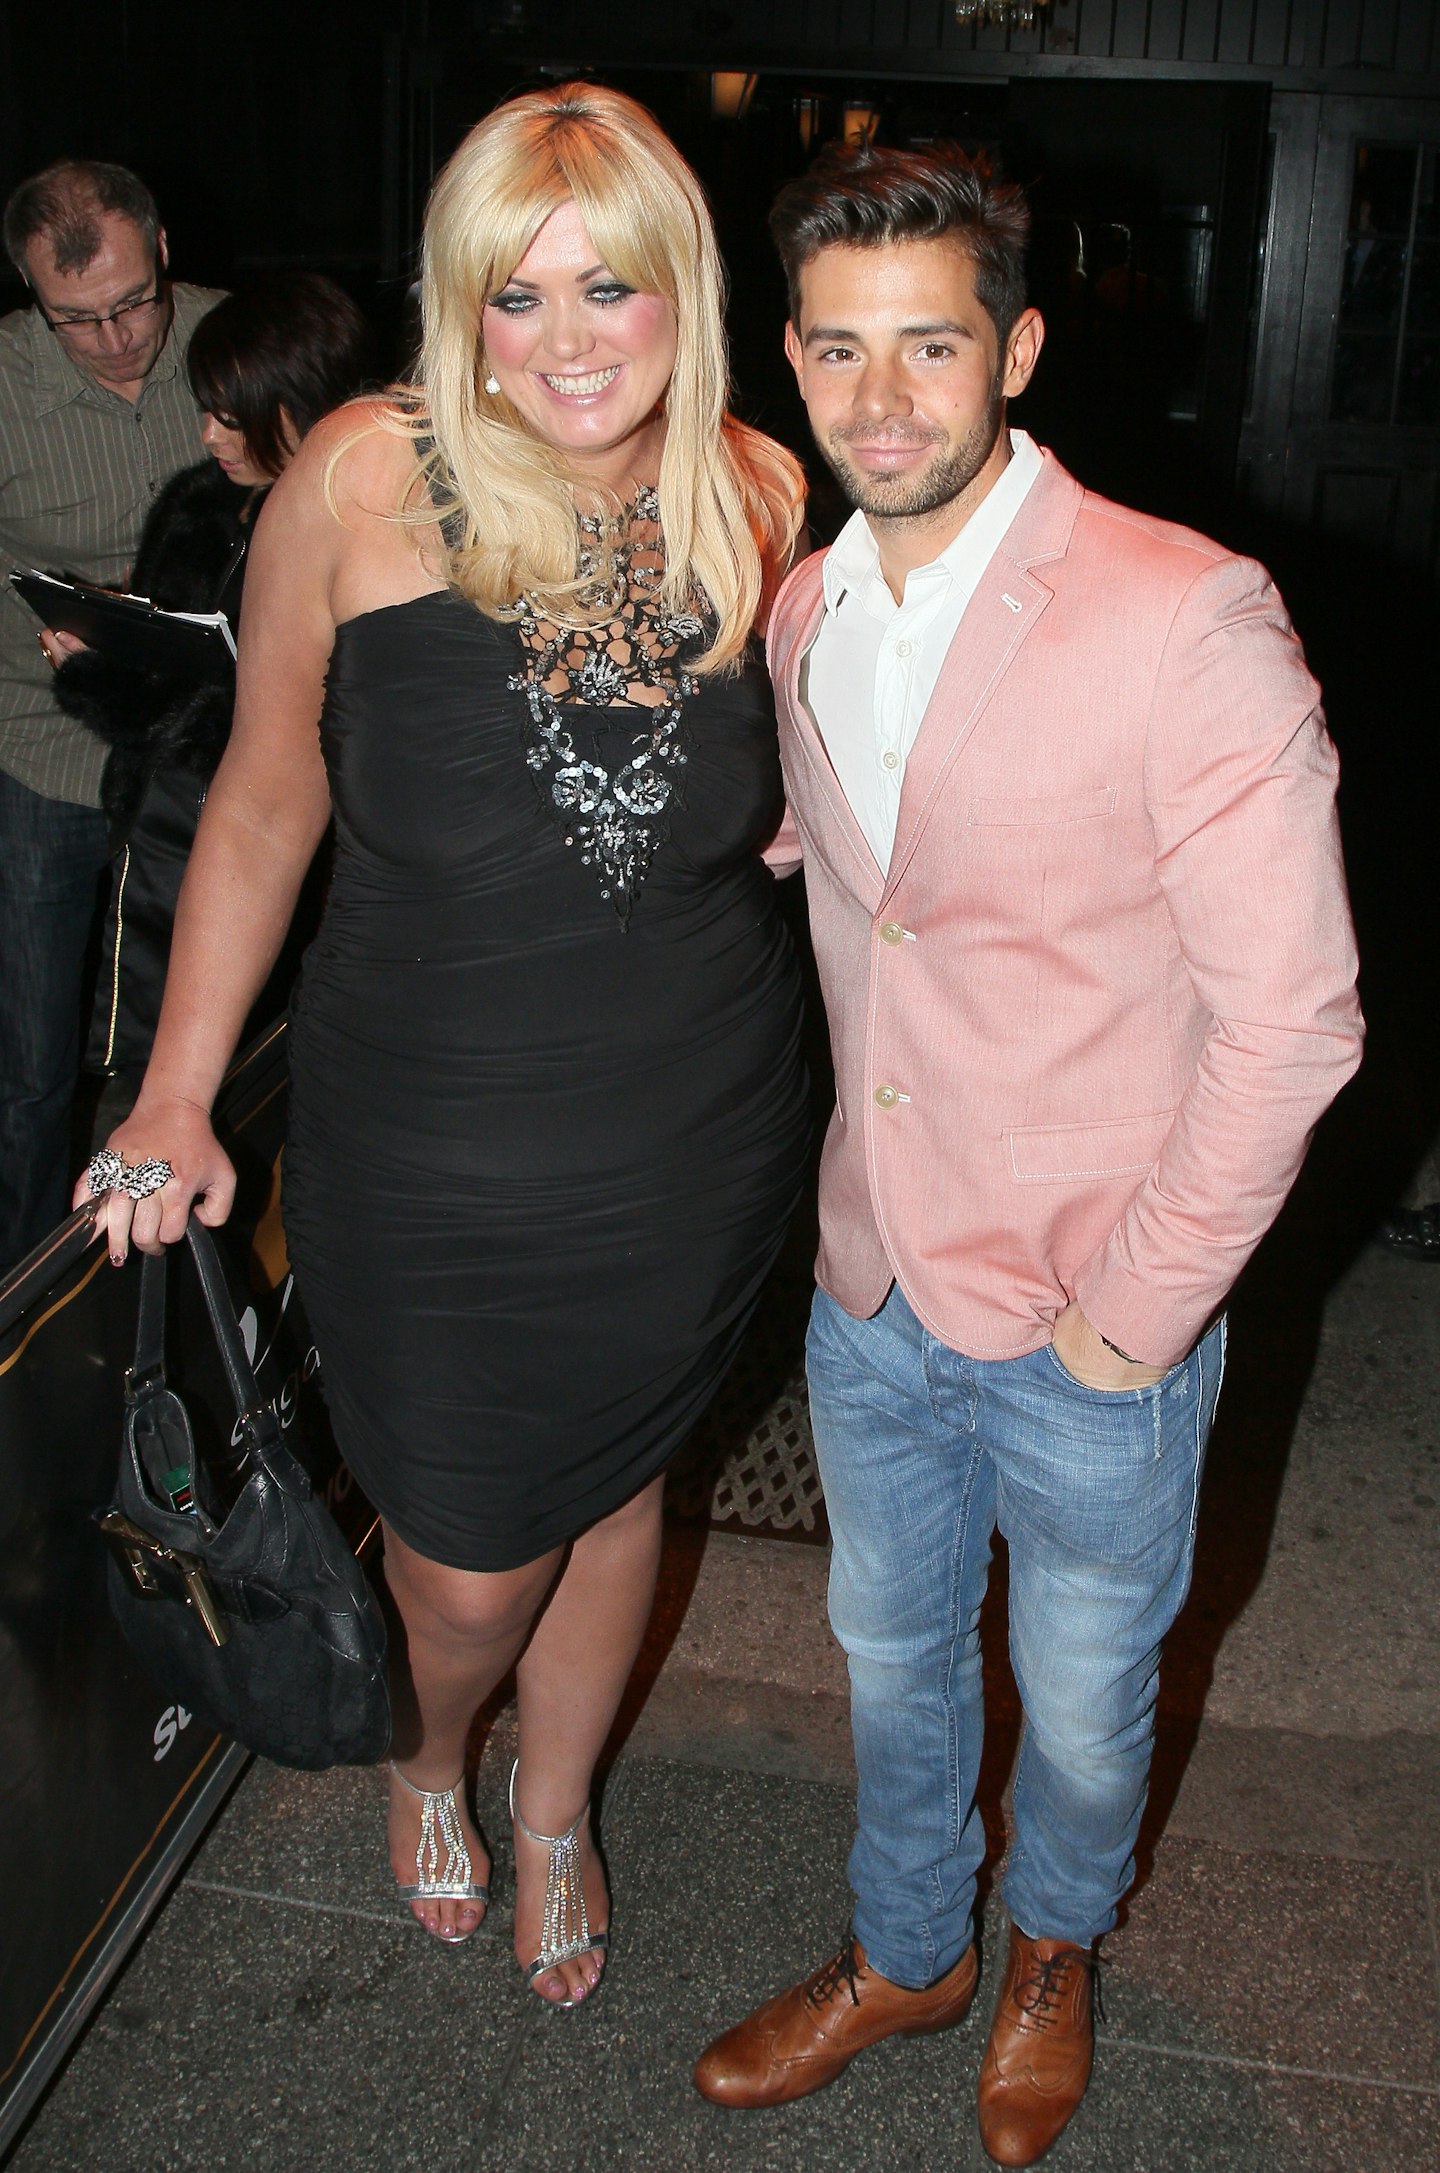 Gemma Collins and Charlie King